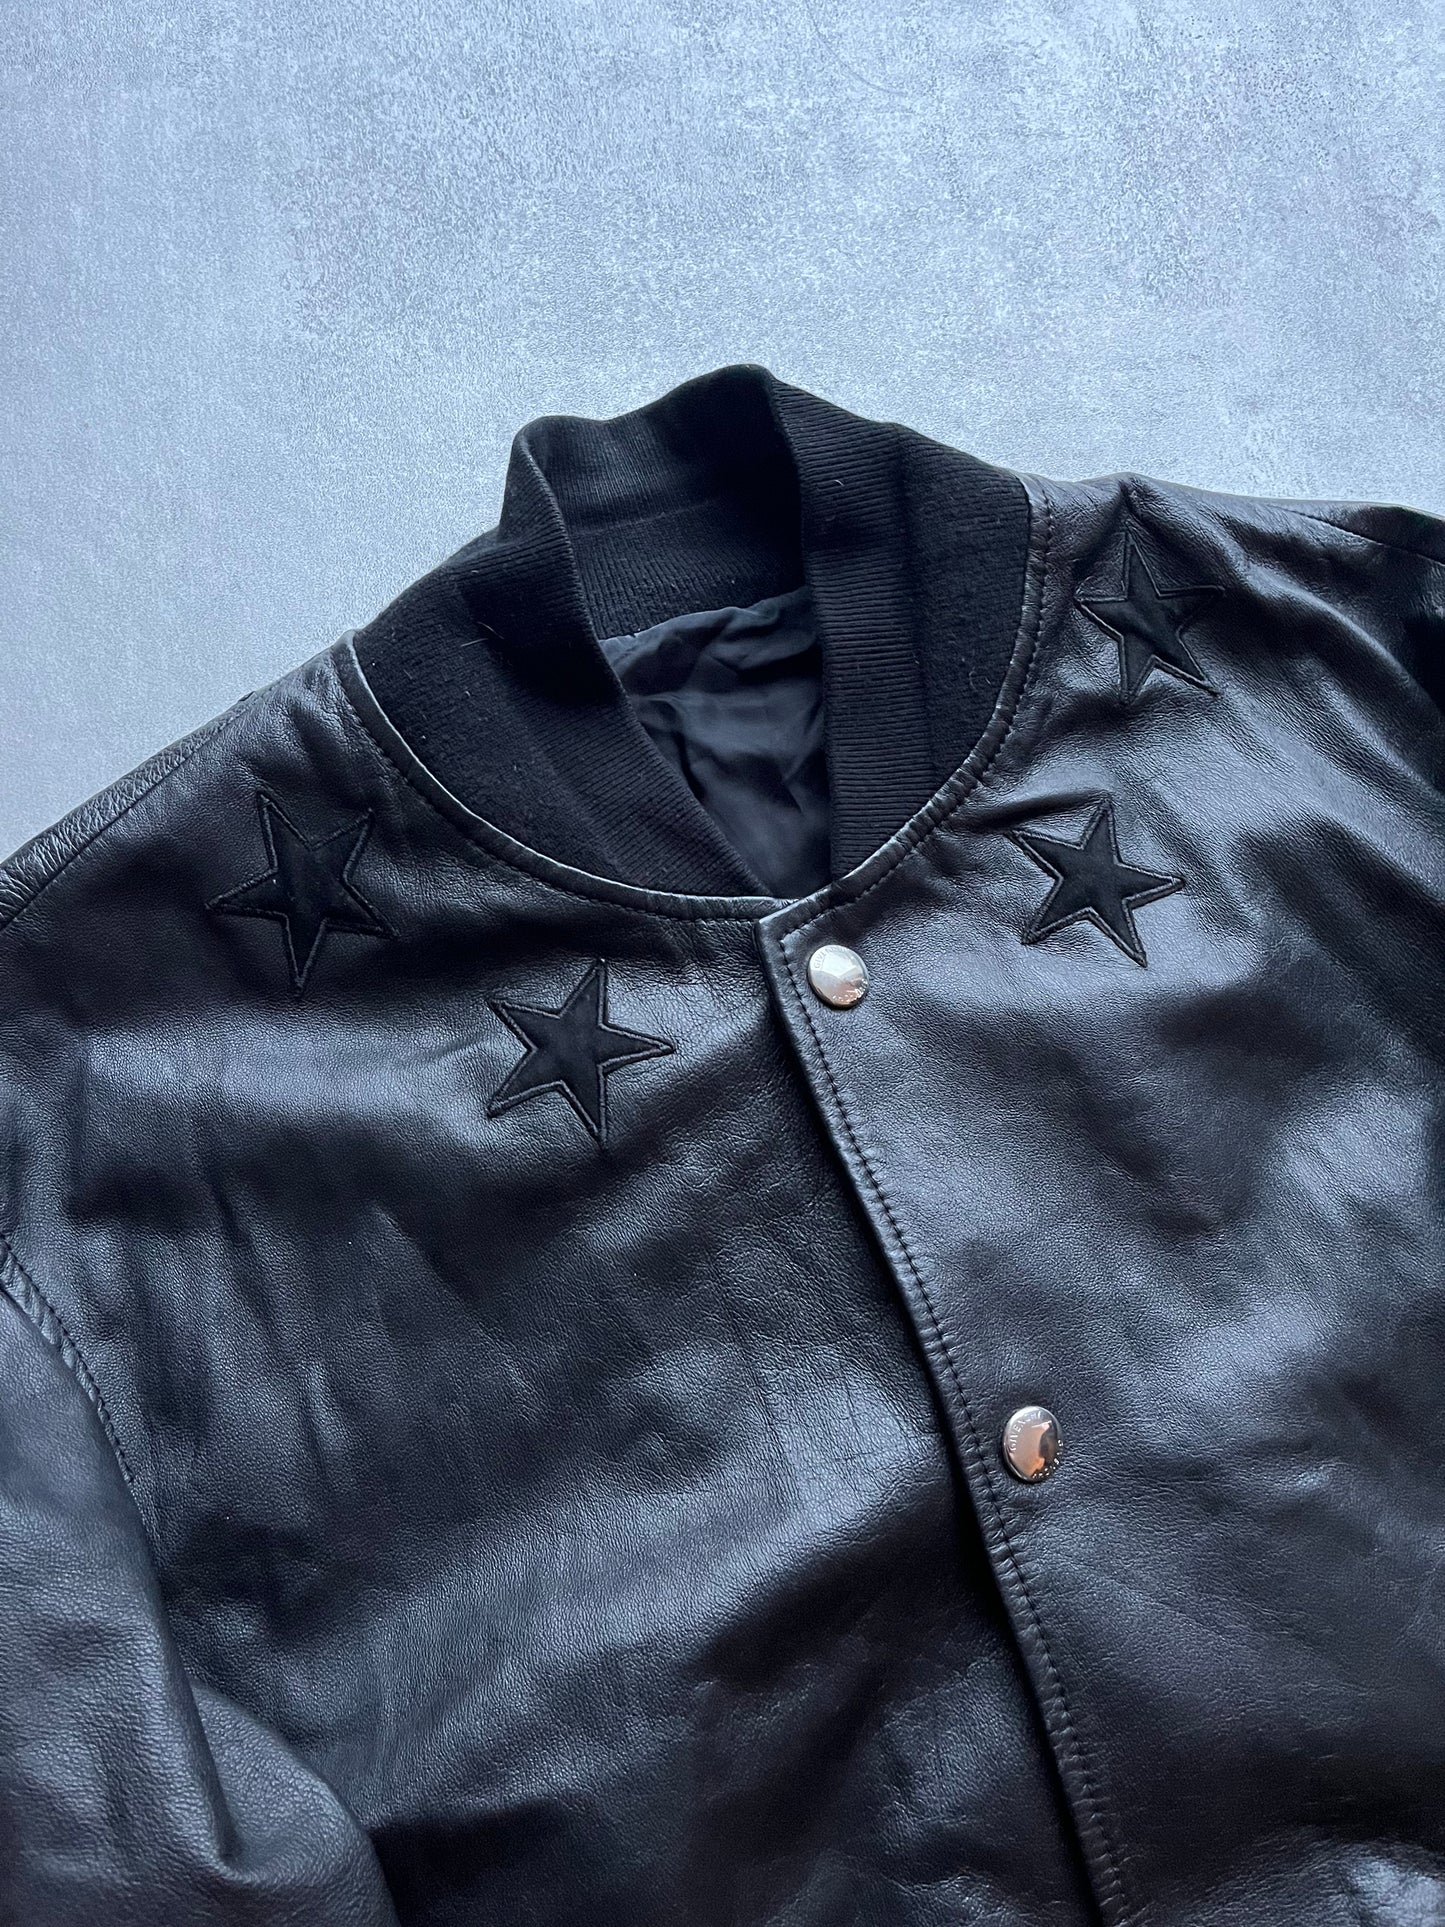 SS2014 Givenchy Star Leather Bomber Jacket - 6